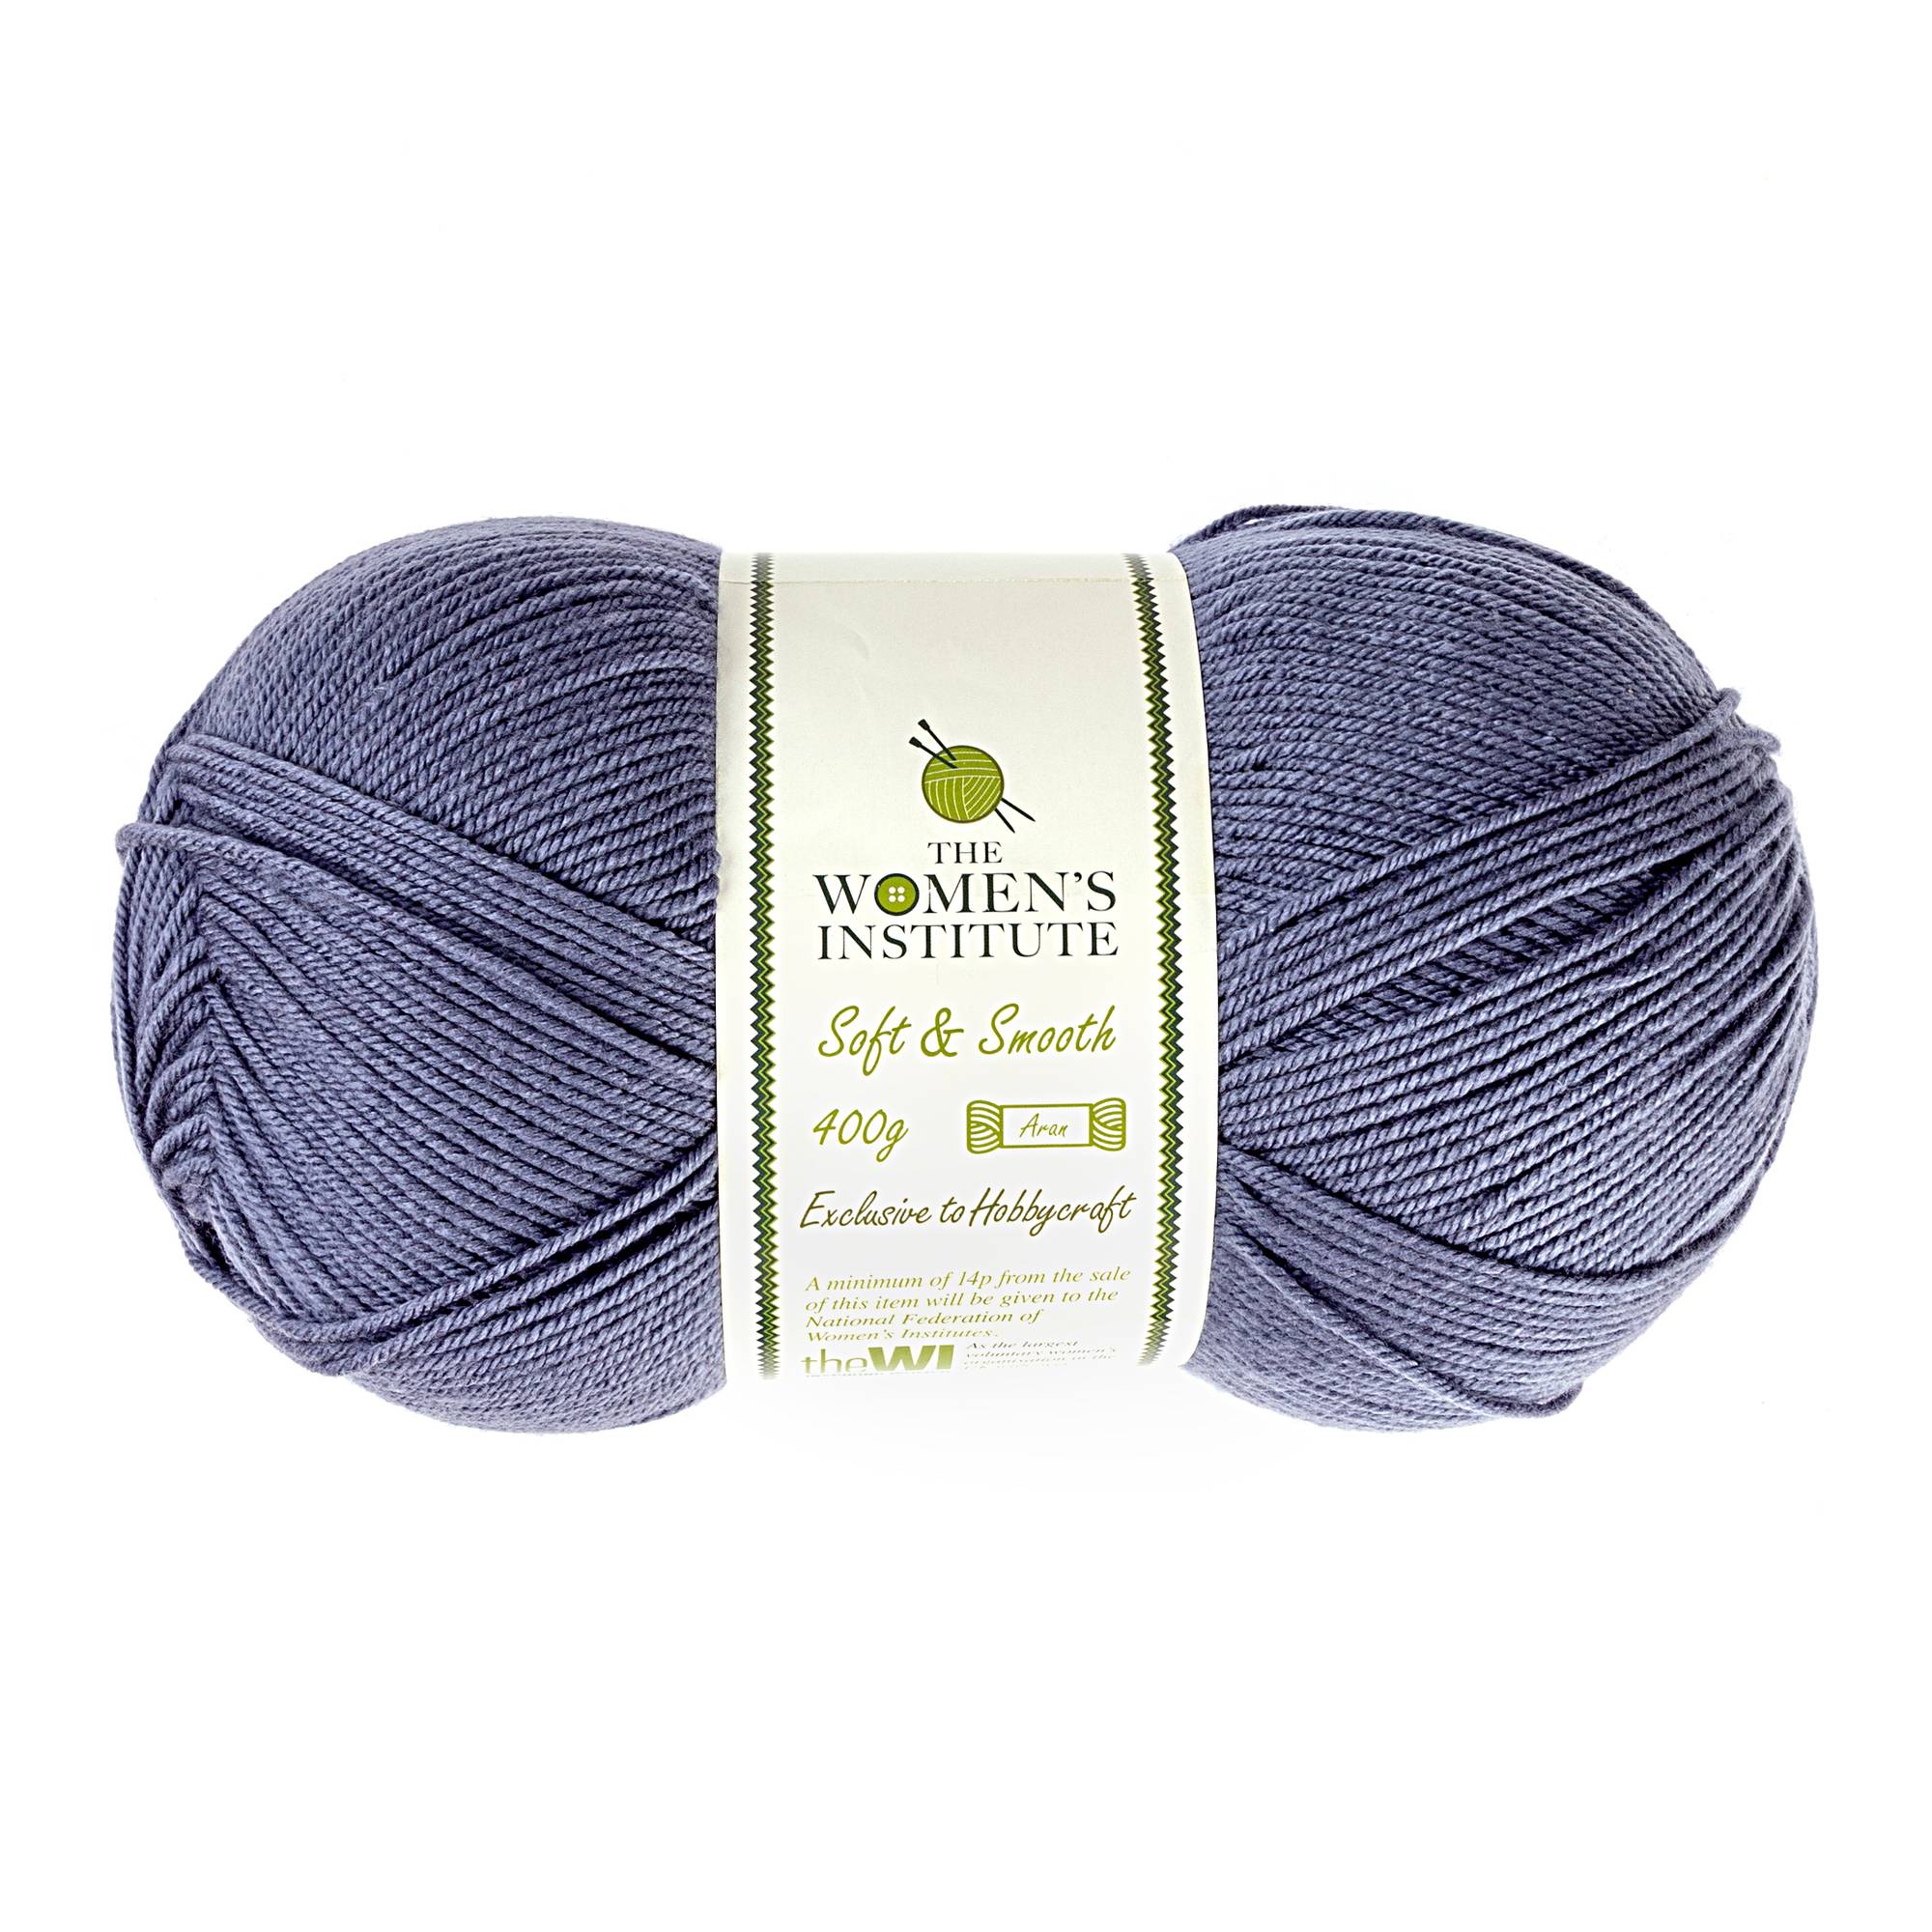 Women's Institute Blue and Grey Soft and Smooth Aran Yarn 400g